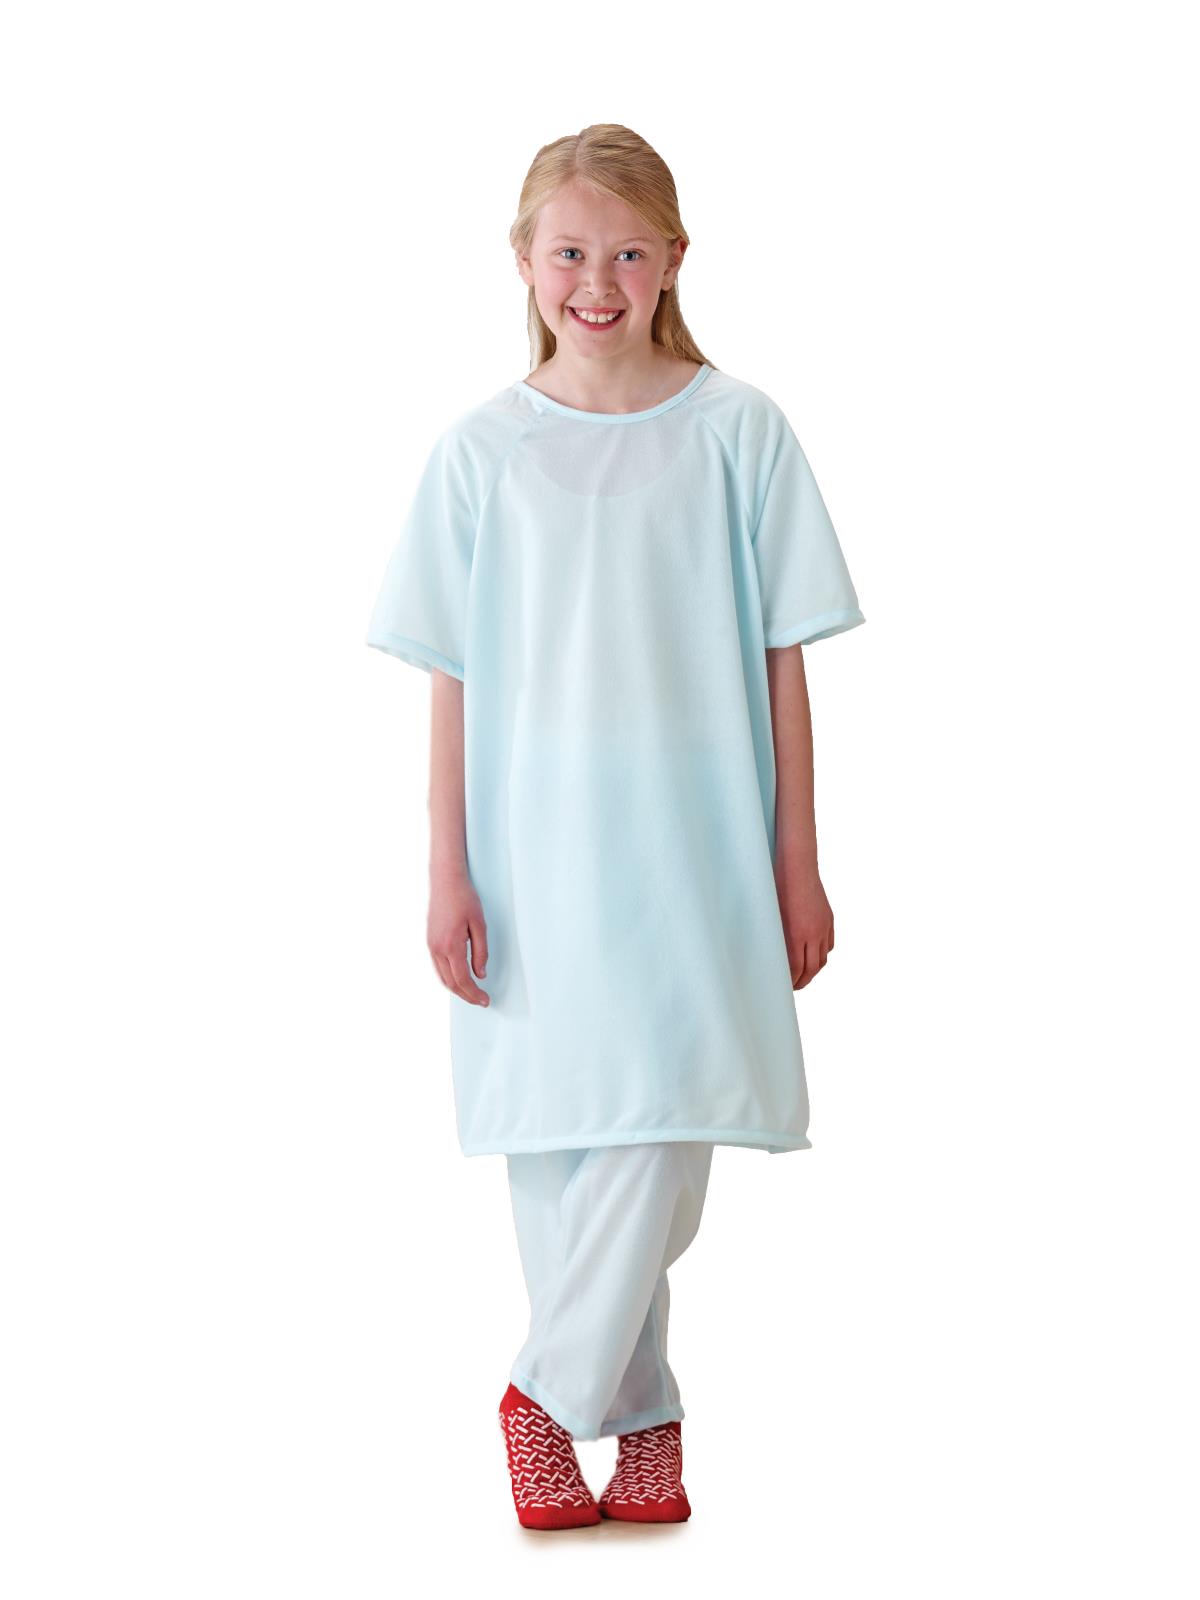 Medline Safety Gown Price Starting From Rs 20/Pc | Find Verified Sellers at  Justdial